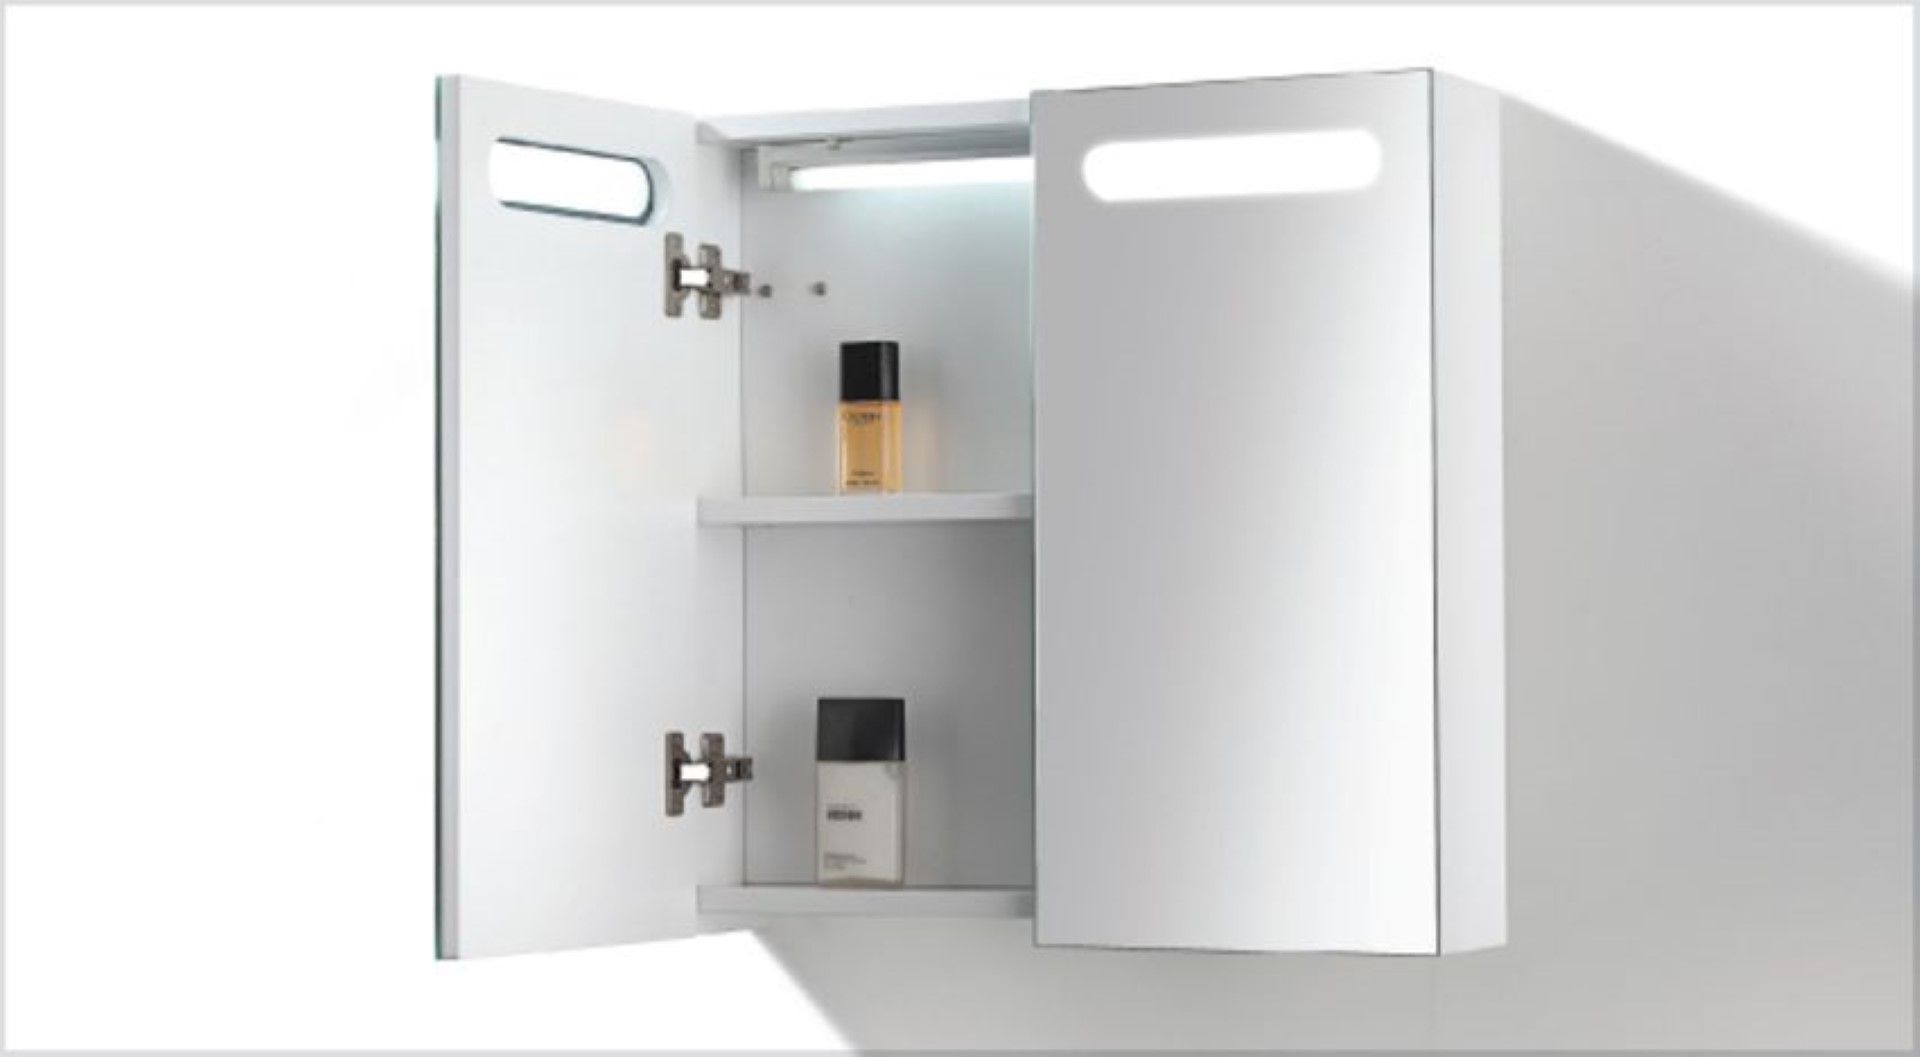 1 x Austin Bathrooms EDEN Two Door 800mm Mirrored Bathroom Cabinet - New and Boxed - RRP £350 - Ref: - Image 2 of 3